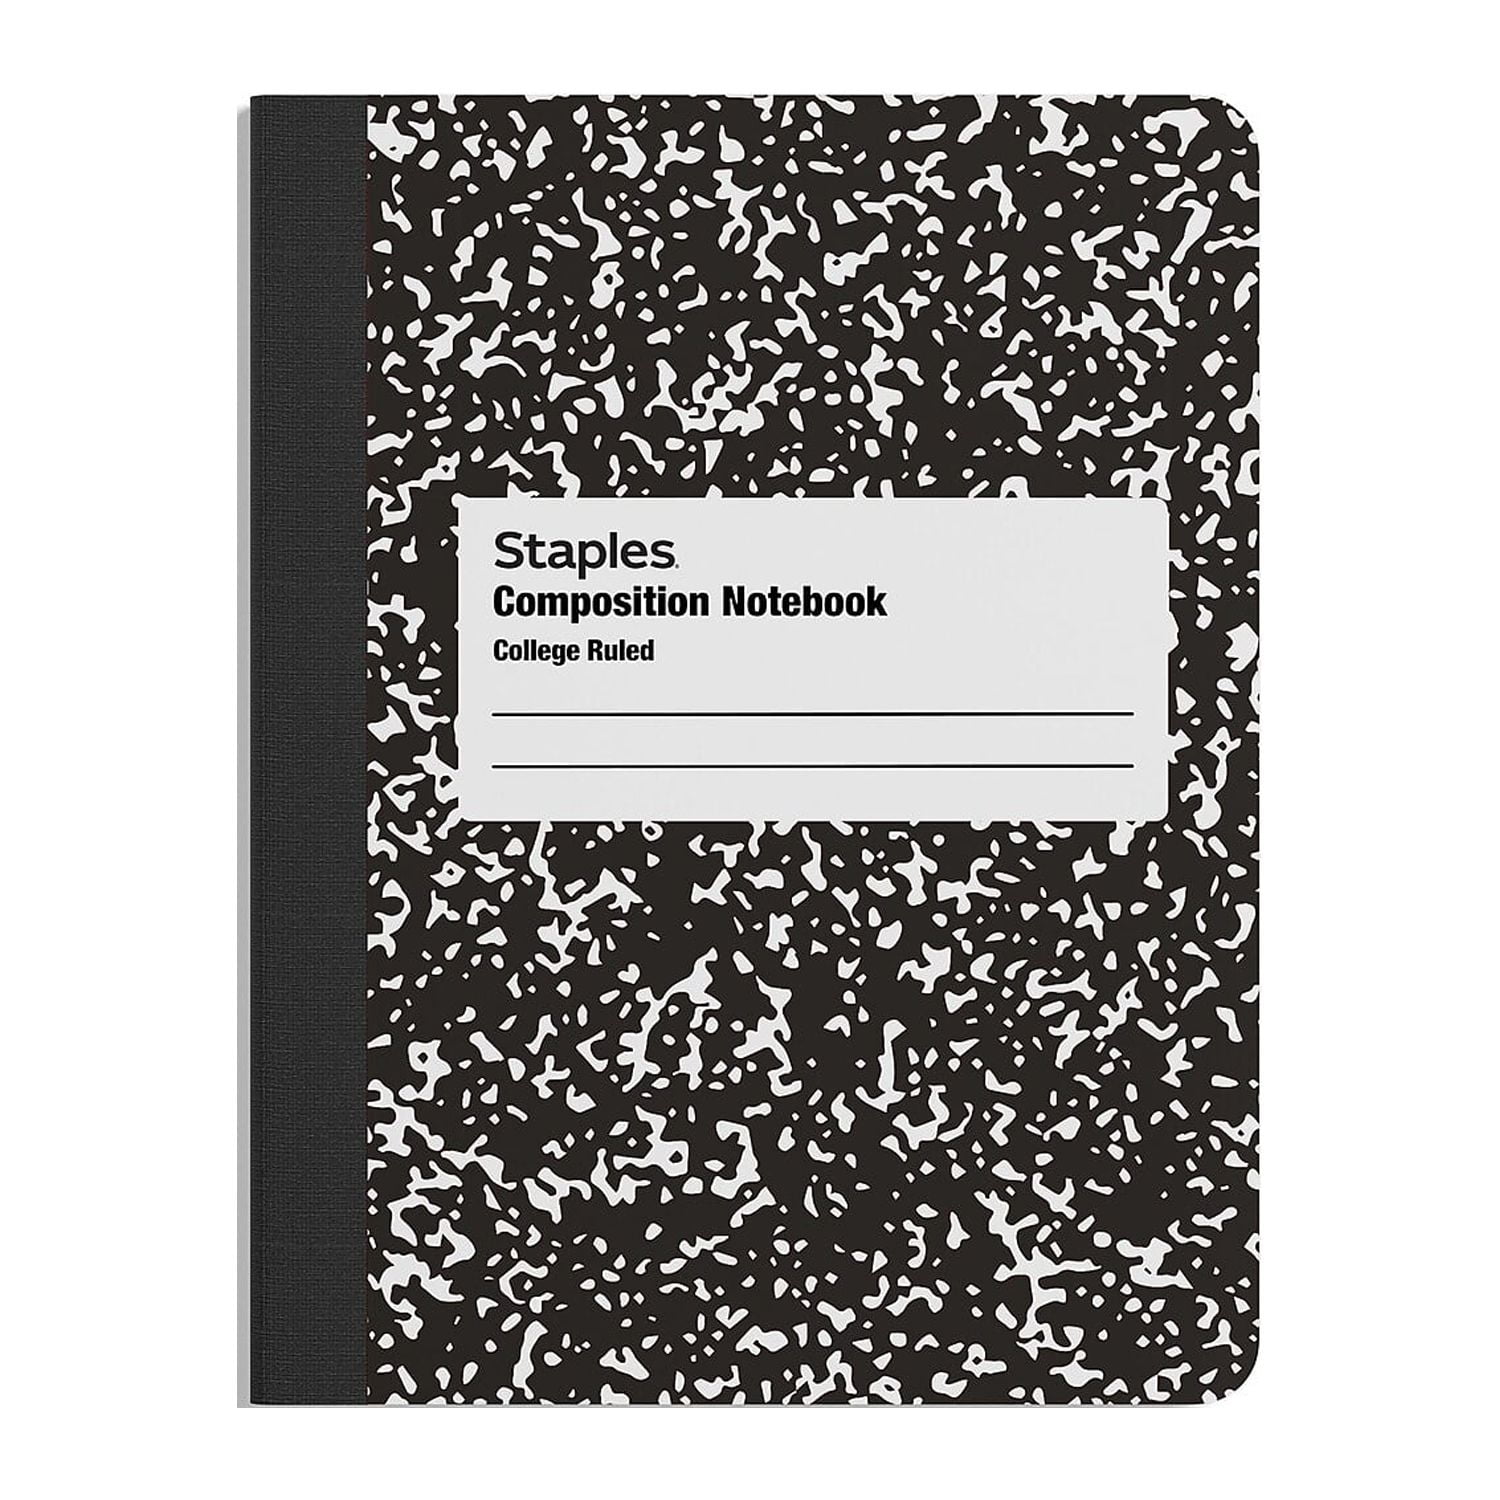 Staple Stitch Scolaire Students Copybook Composition Notebook